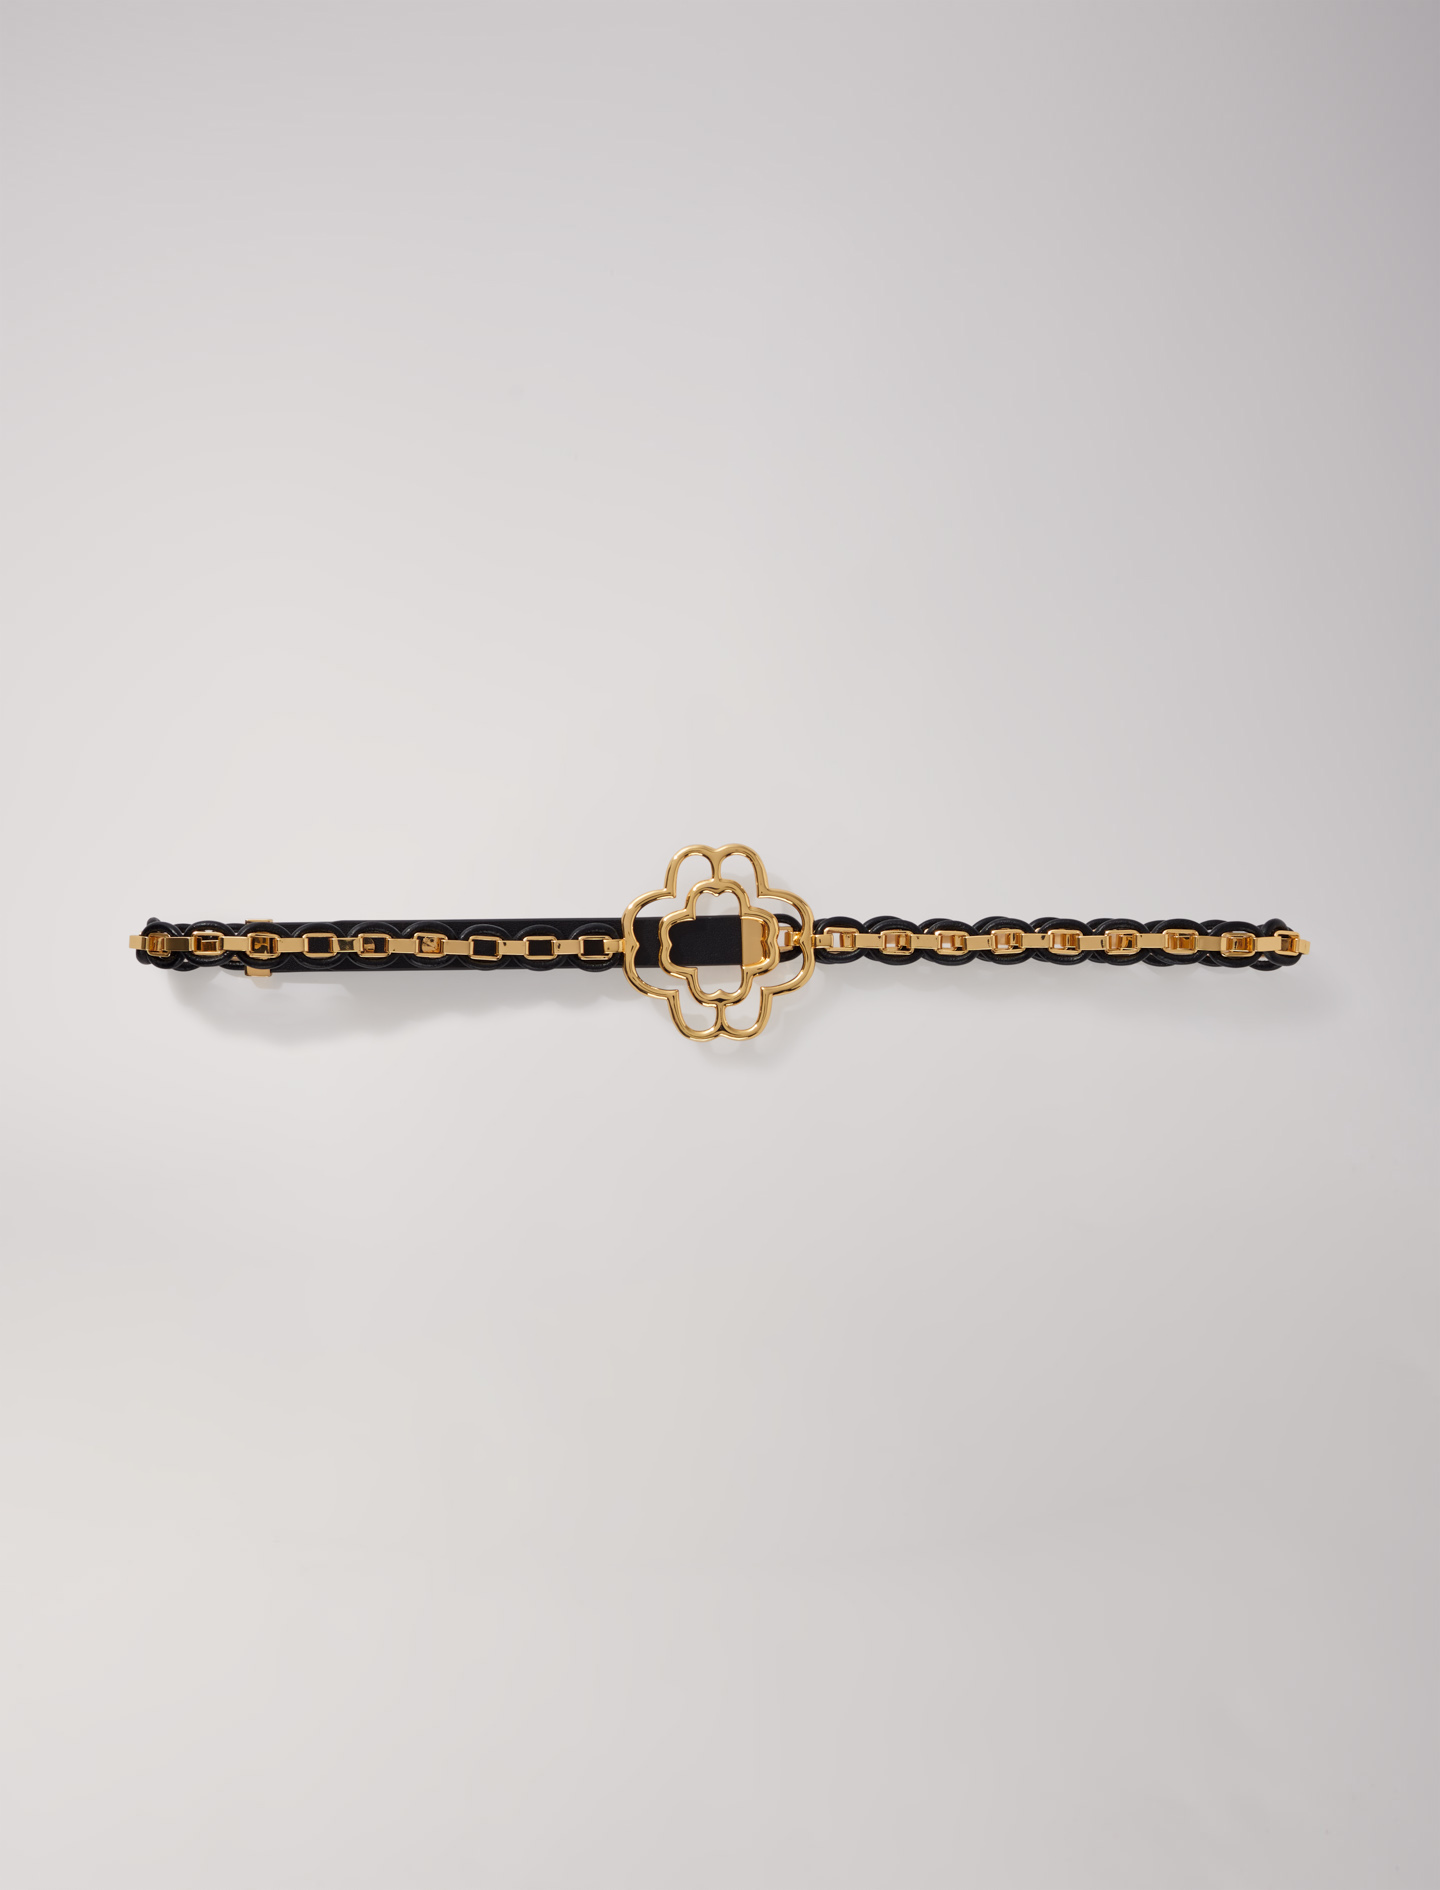 Maje Woman's brass Chain: Clover fine mix chain belt for Spring/Summer, in color Black / Black